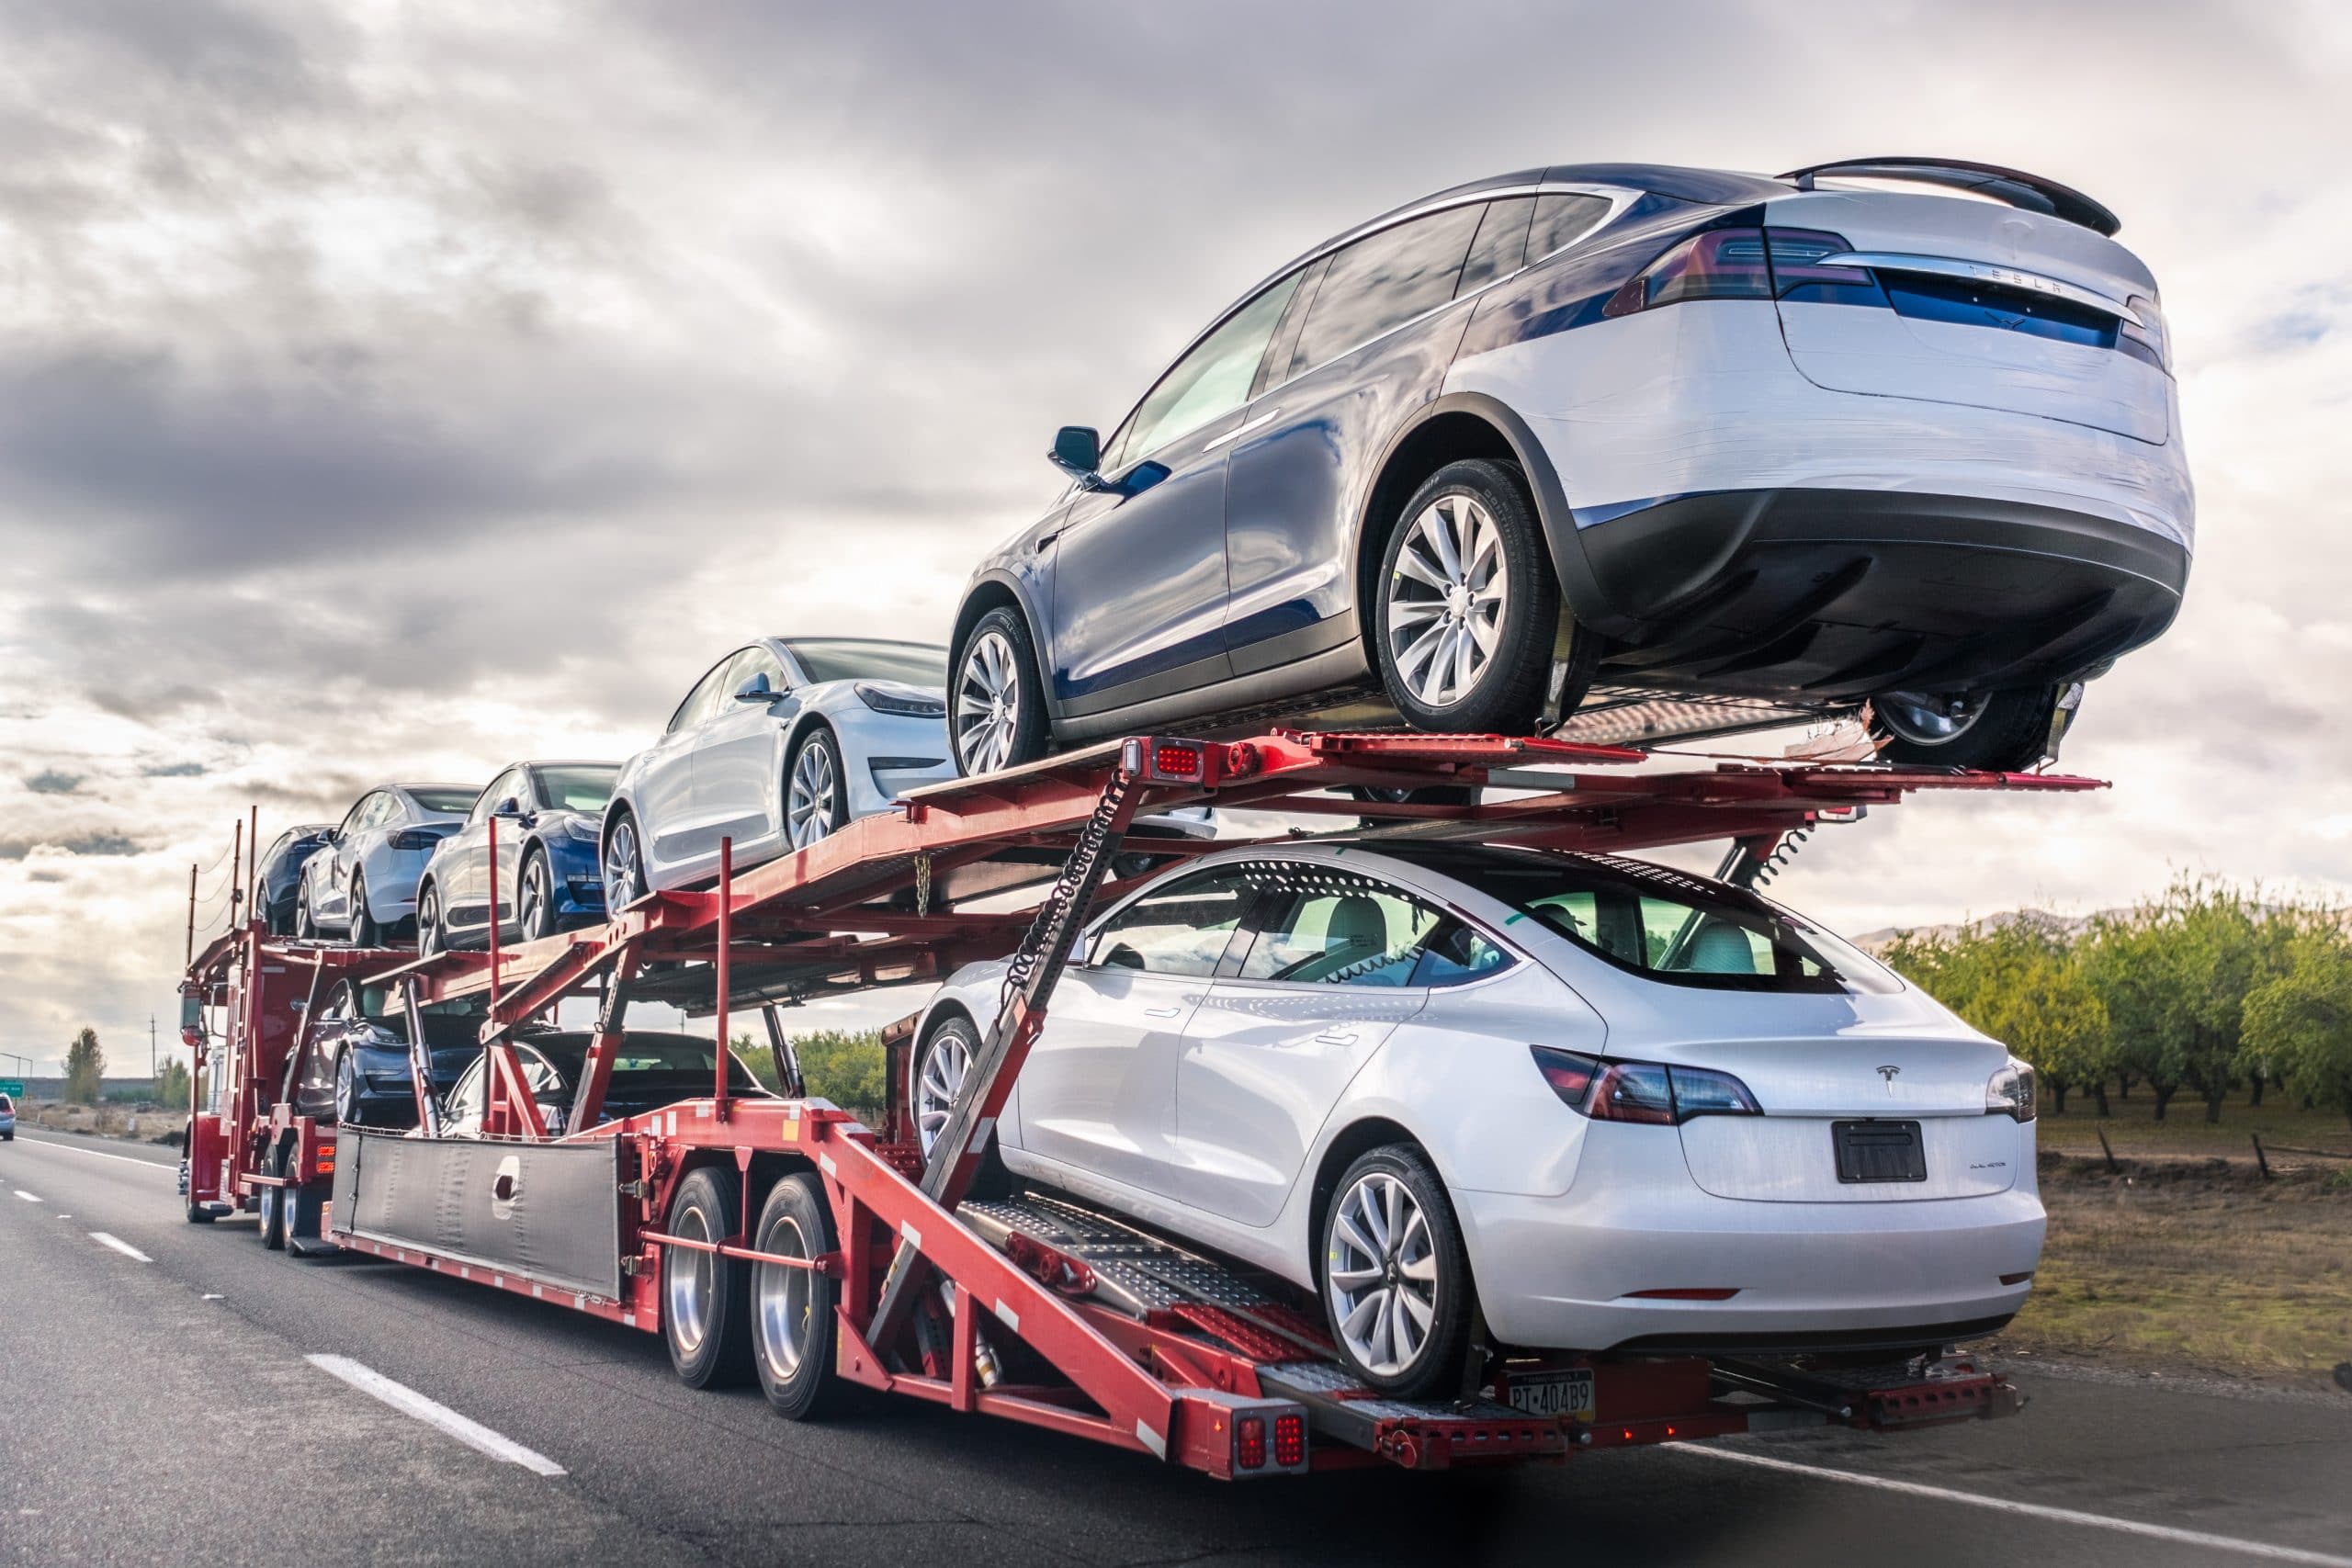 Dec 8, 2019 Bakersfield / CA / USA - Car transporter carries new Tesla vehicles along the interstate to South California, back view of the trailer